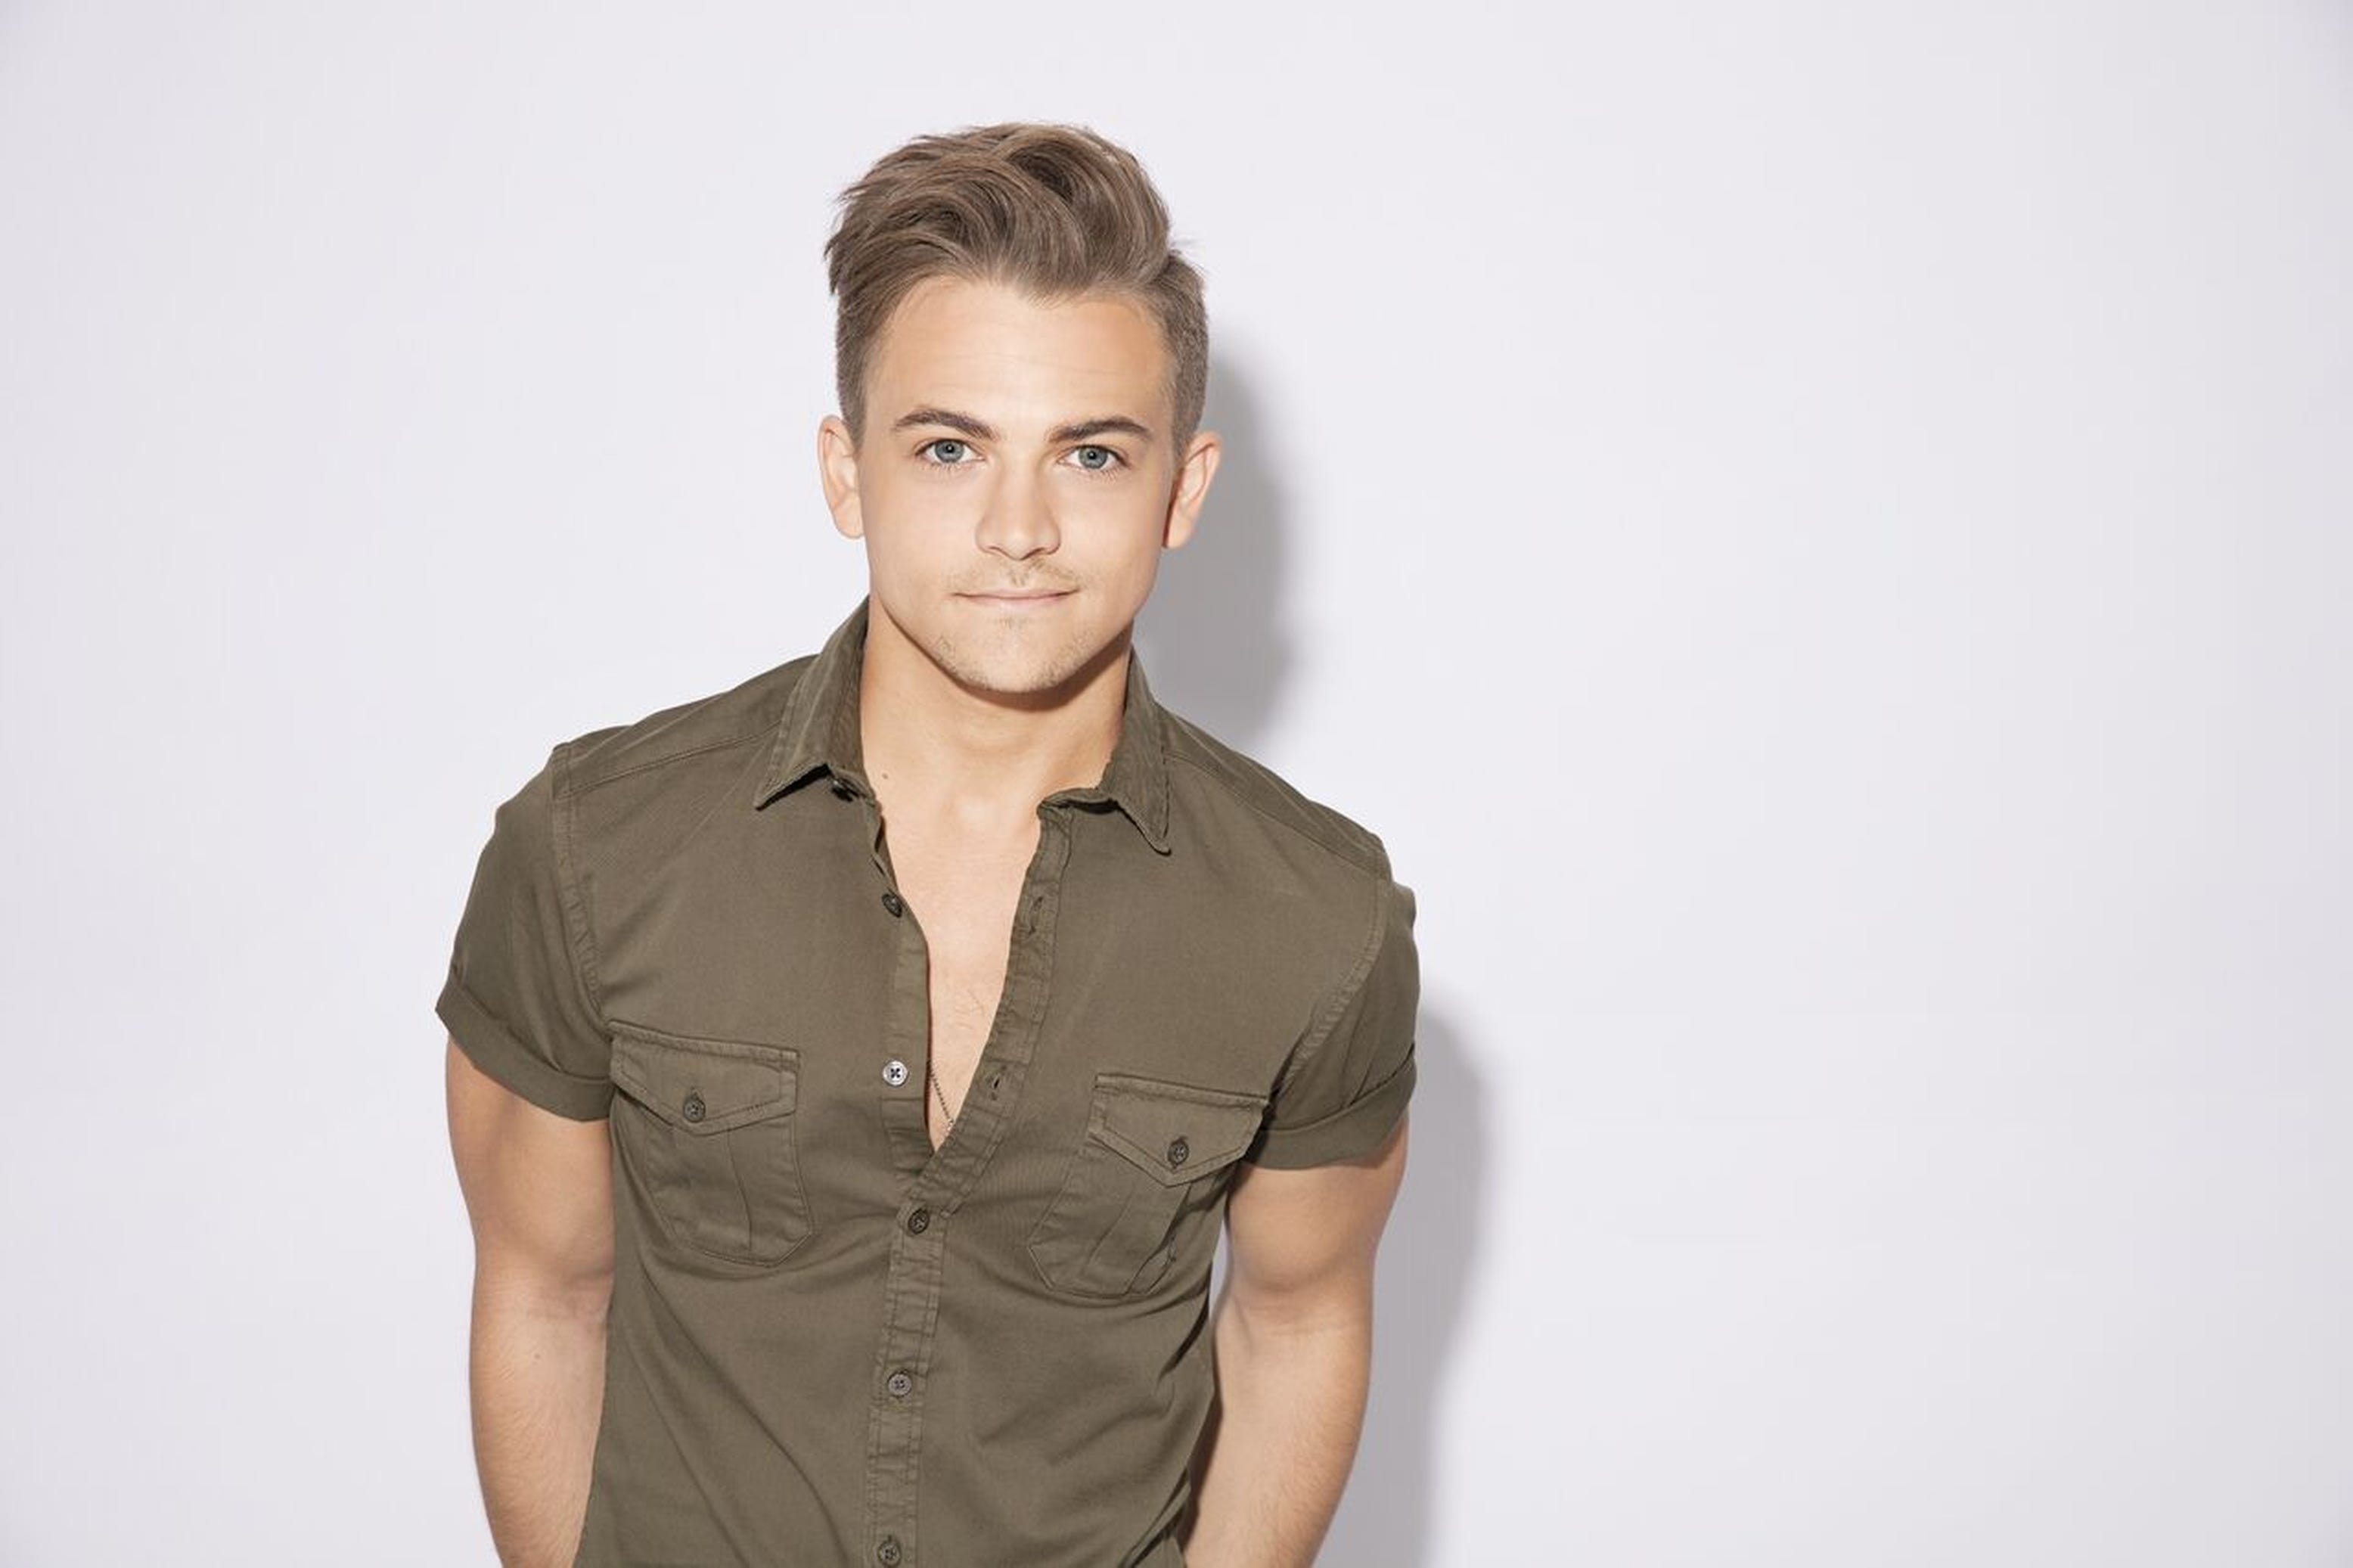 Hunter Hayes Sings Tattoo at CMT Music Awards 2014  2014 CMT Music  Awards Hunter Hayes  Just Jared Entertainment News and Celebrity Photos